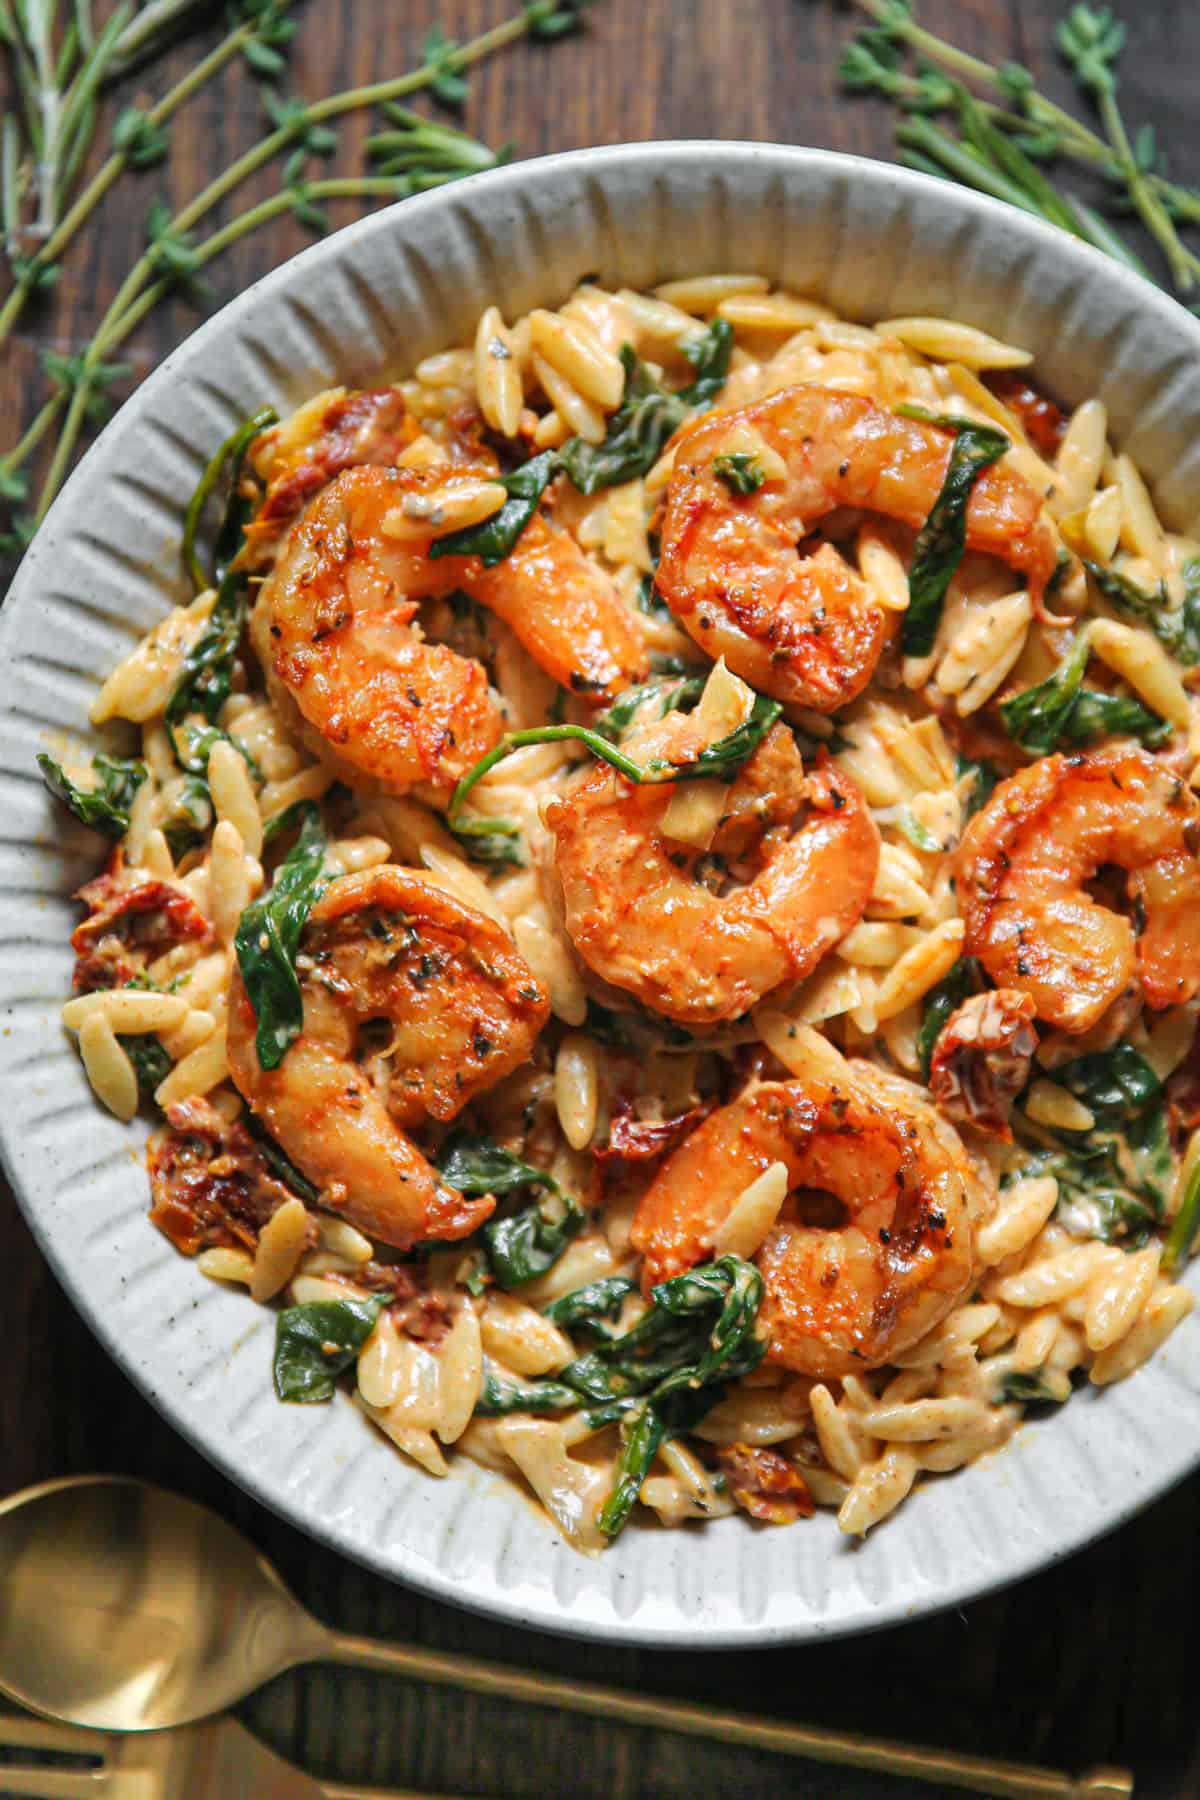 Creamy Shrimp Orzo with Spinach, Sun-Dried Tomatoes, and Artichokes - in a white bowl.